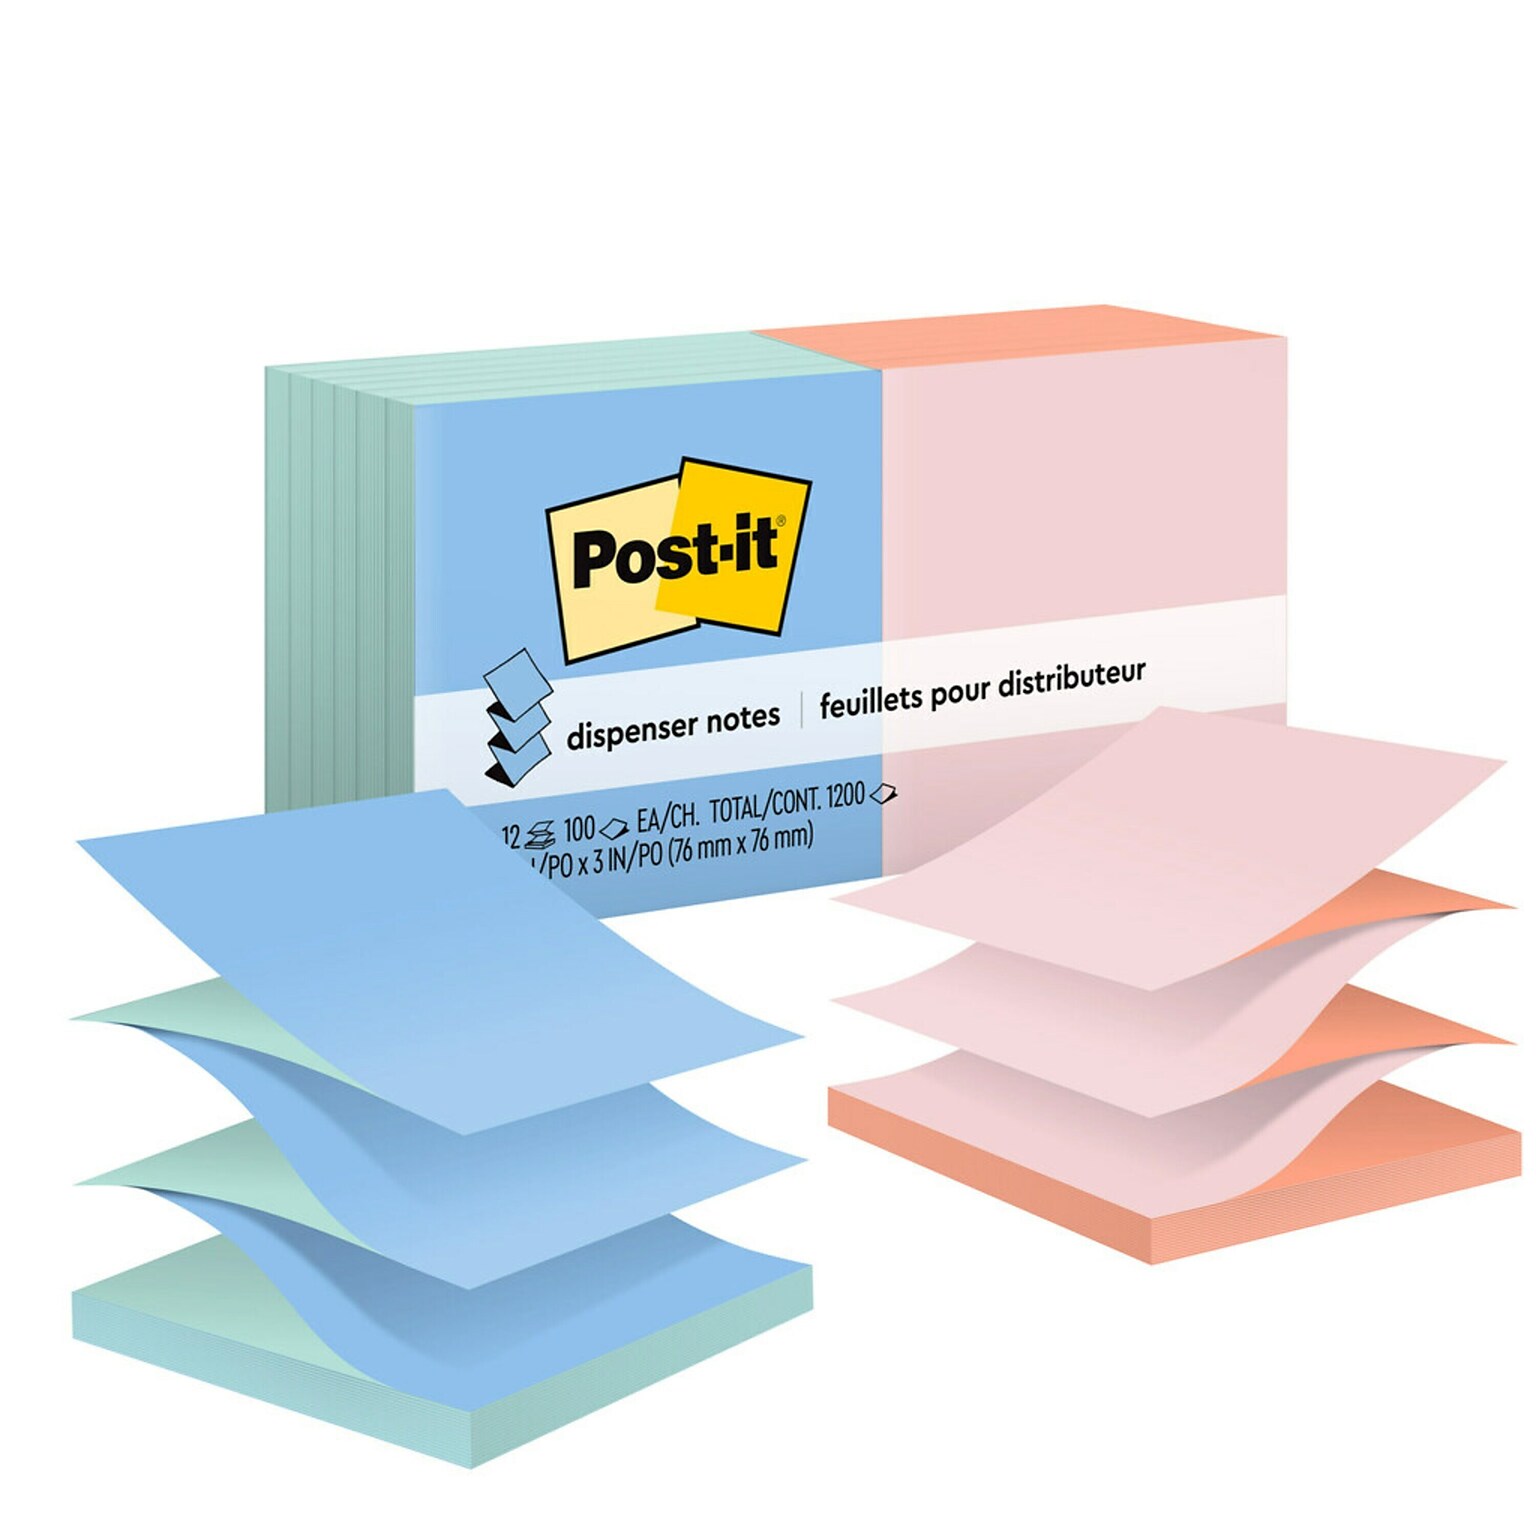 Post-it Pop Up Sticky Notes, 3 x 3 in., 12 Pads, 100 Sheets/Pad, The Original Post-it Note, Alternating Pastel Colors